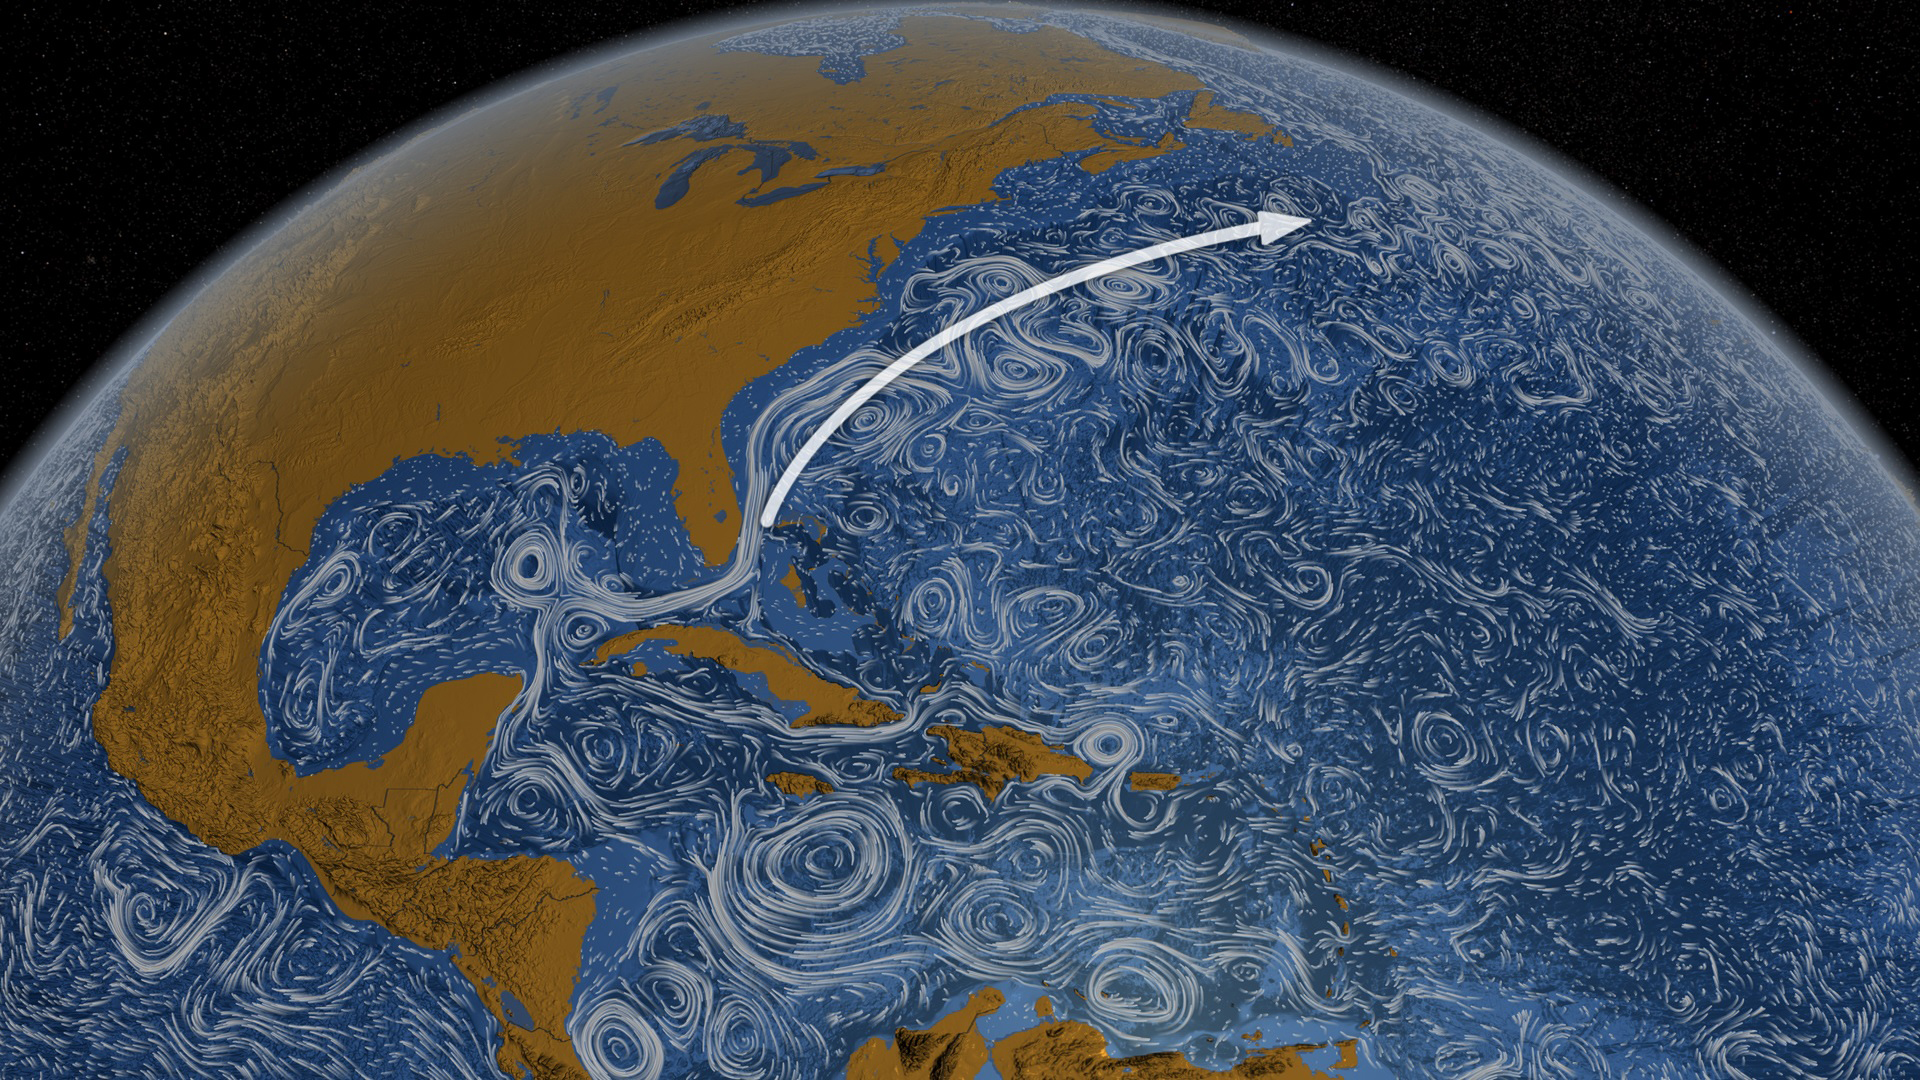 Scientists say the global ocean circulation may be more vulnerable to shutdown than we thought